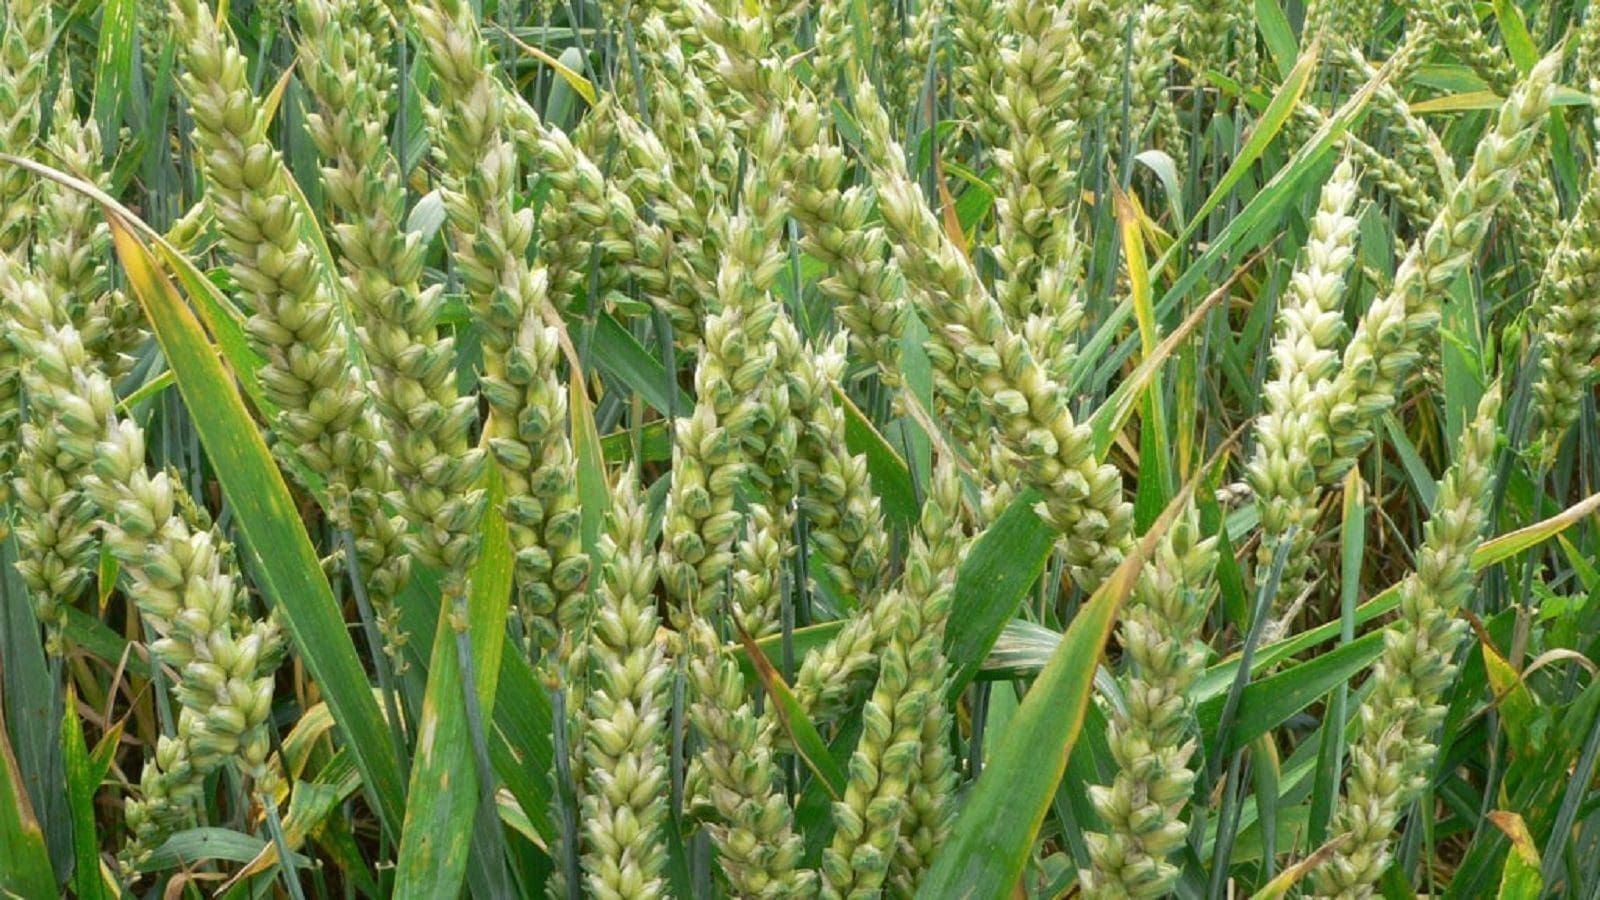 Ethiopia kickstarts summer wheat planting, covers 800,000 hectares in 3 months